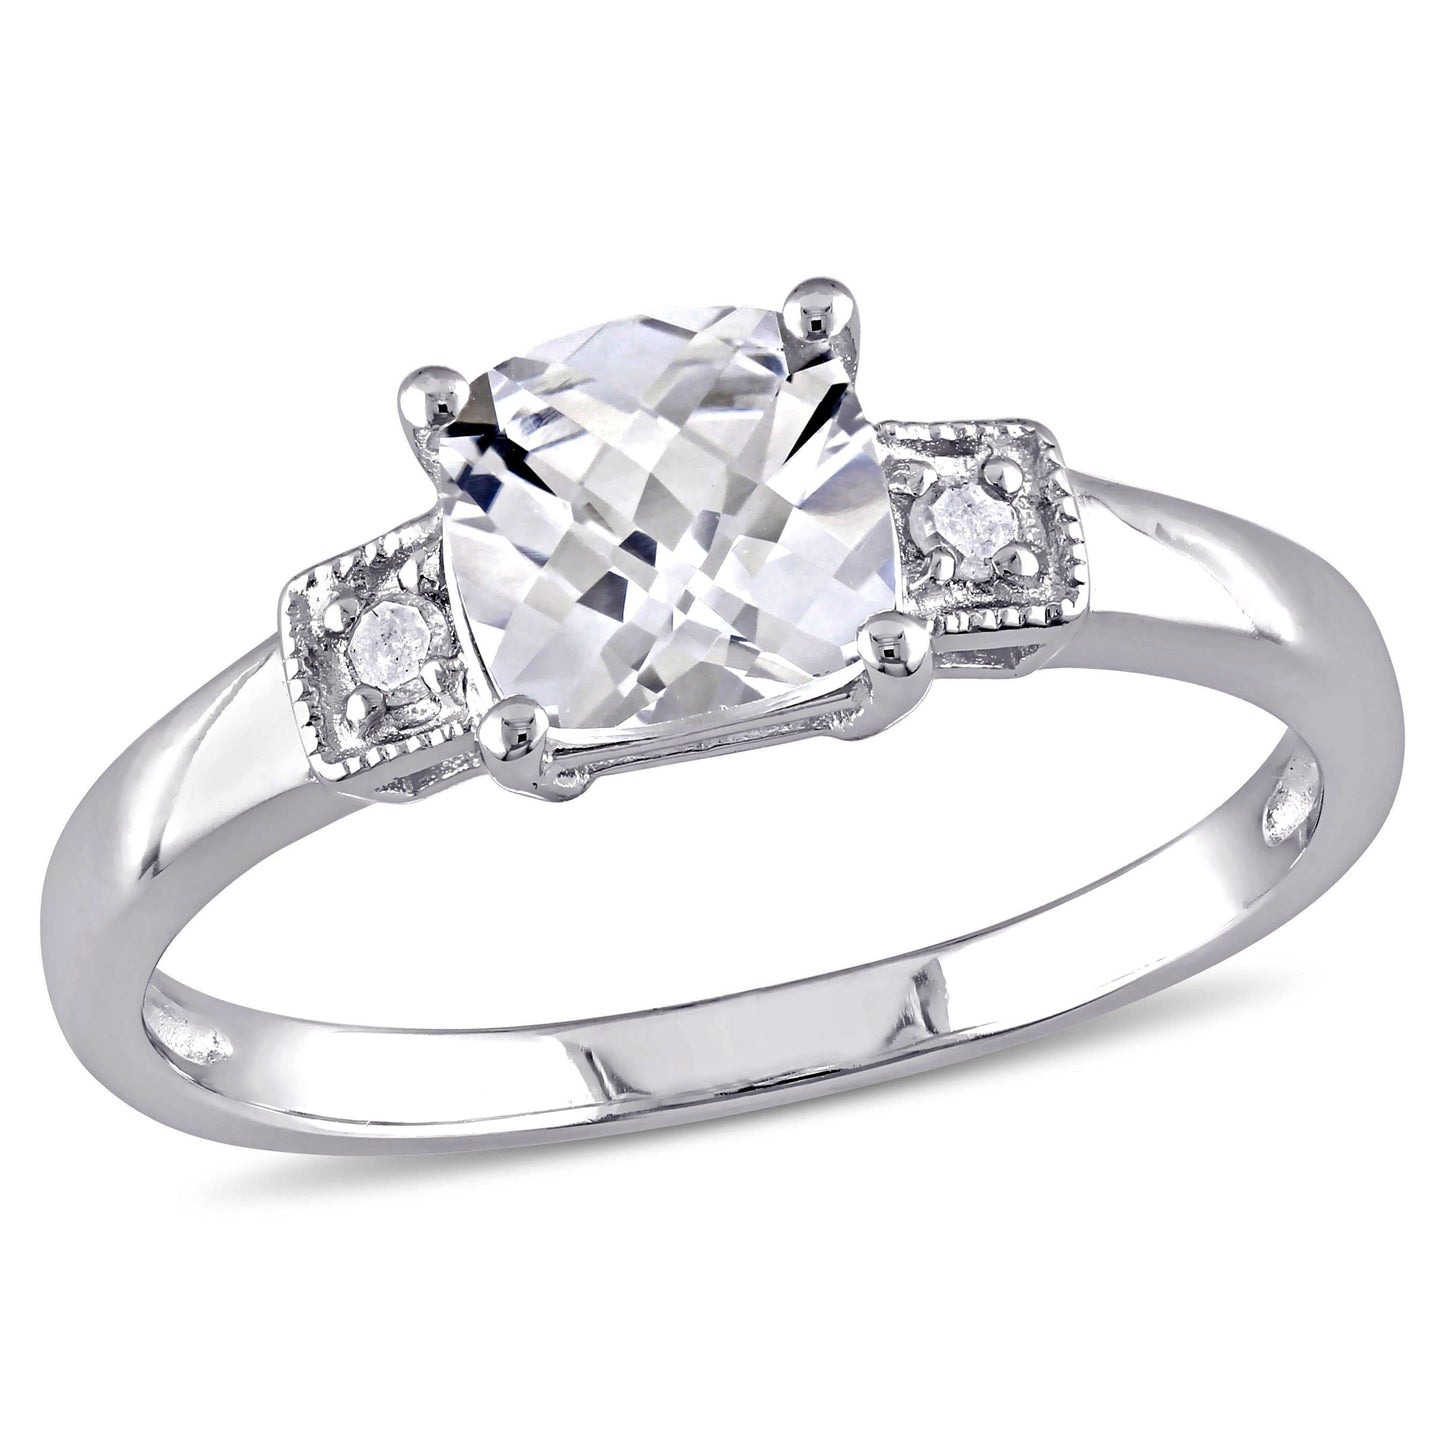 Sophia B 1 1/4ct Lab-Created White Sapphire Ring with Diamond Accents